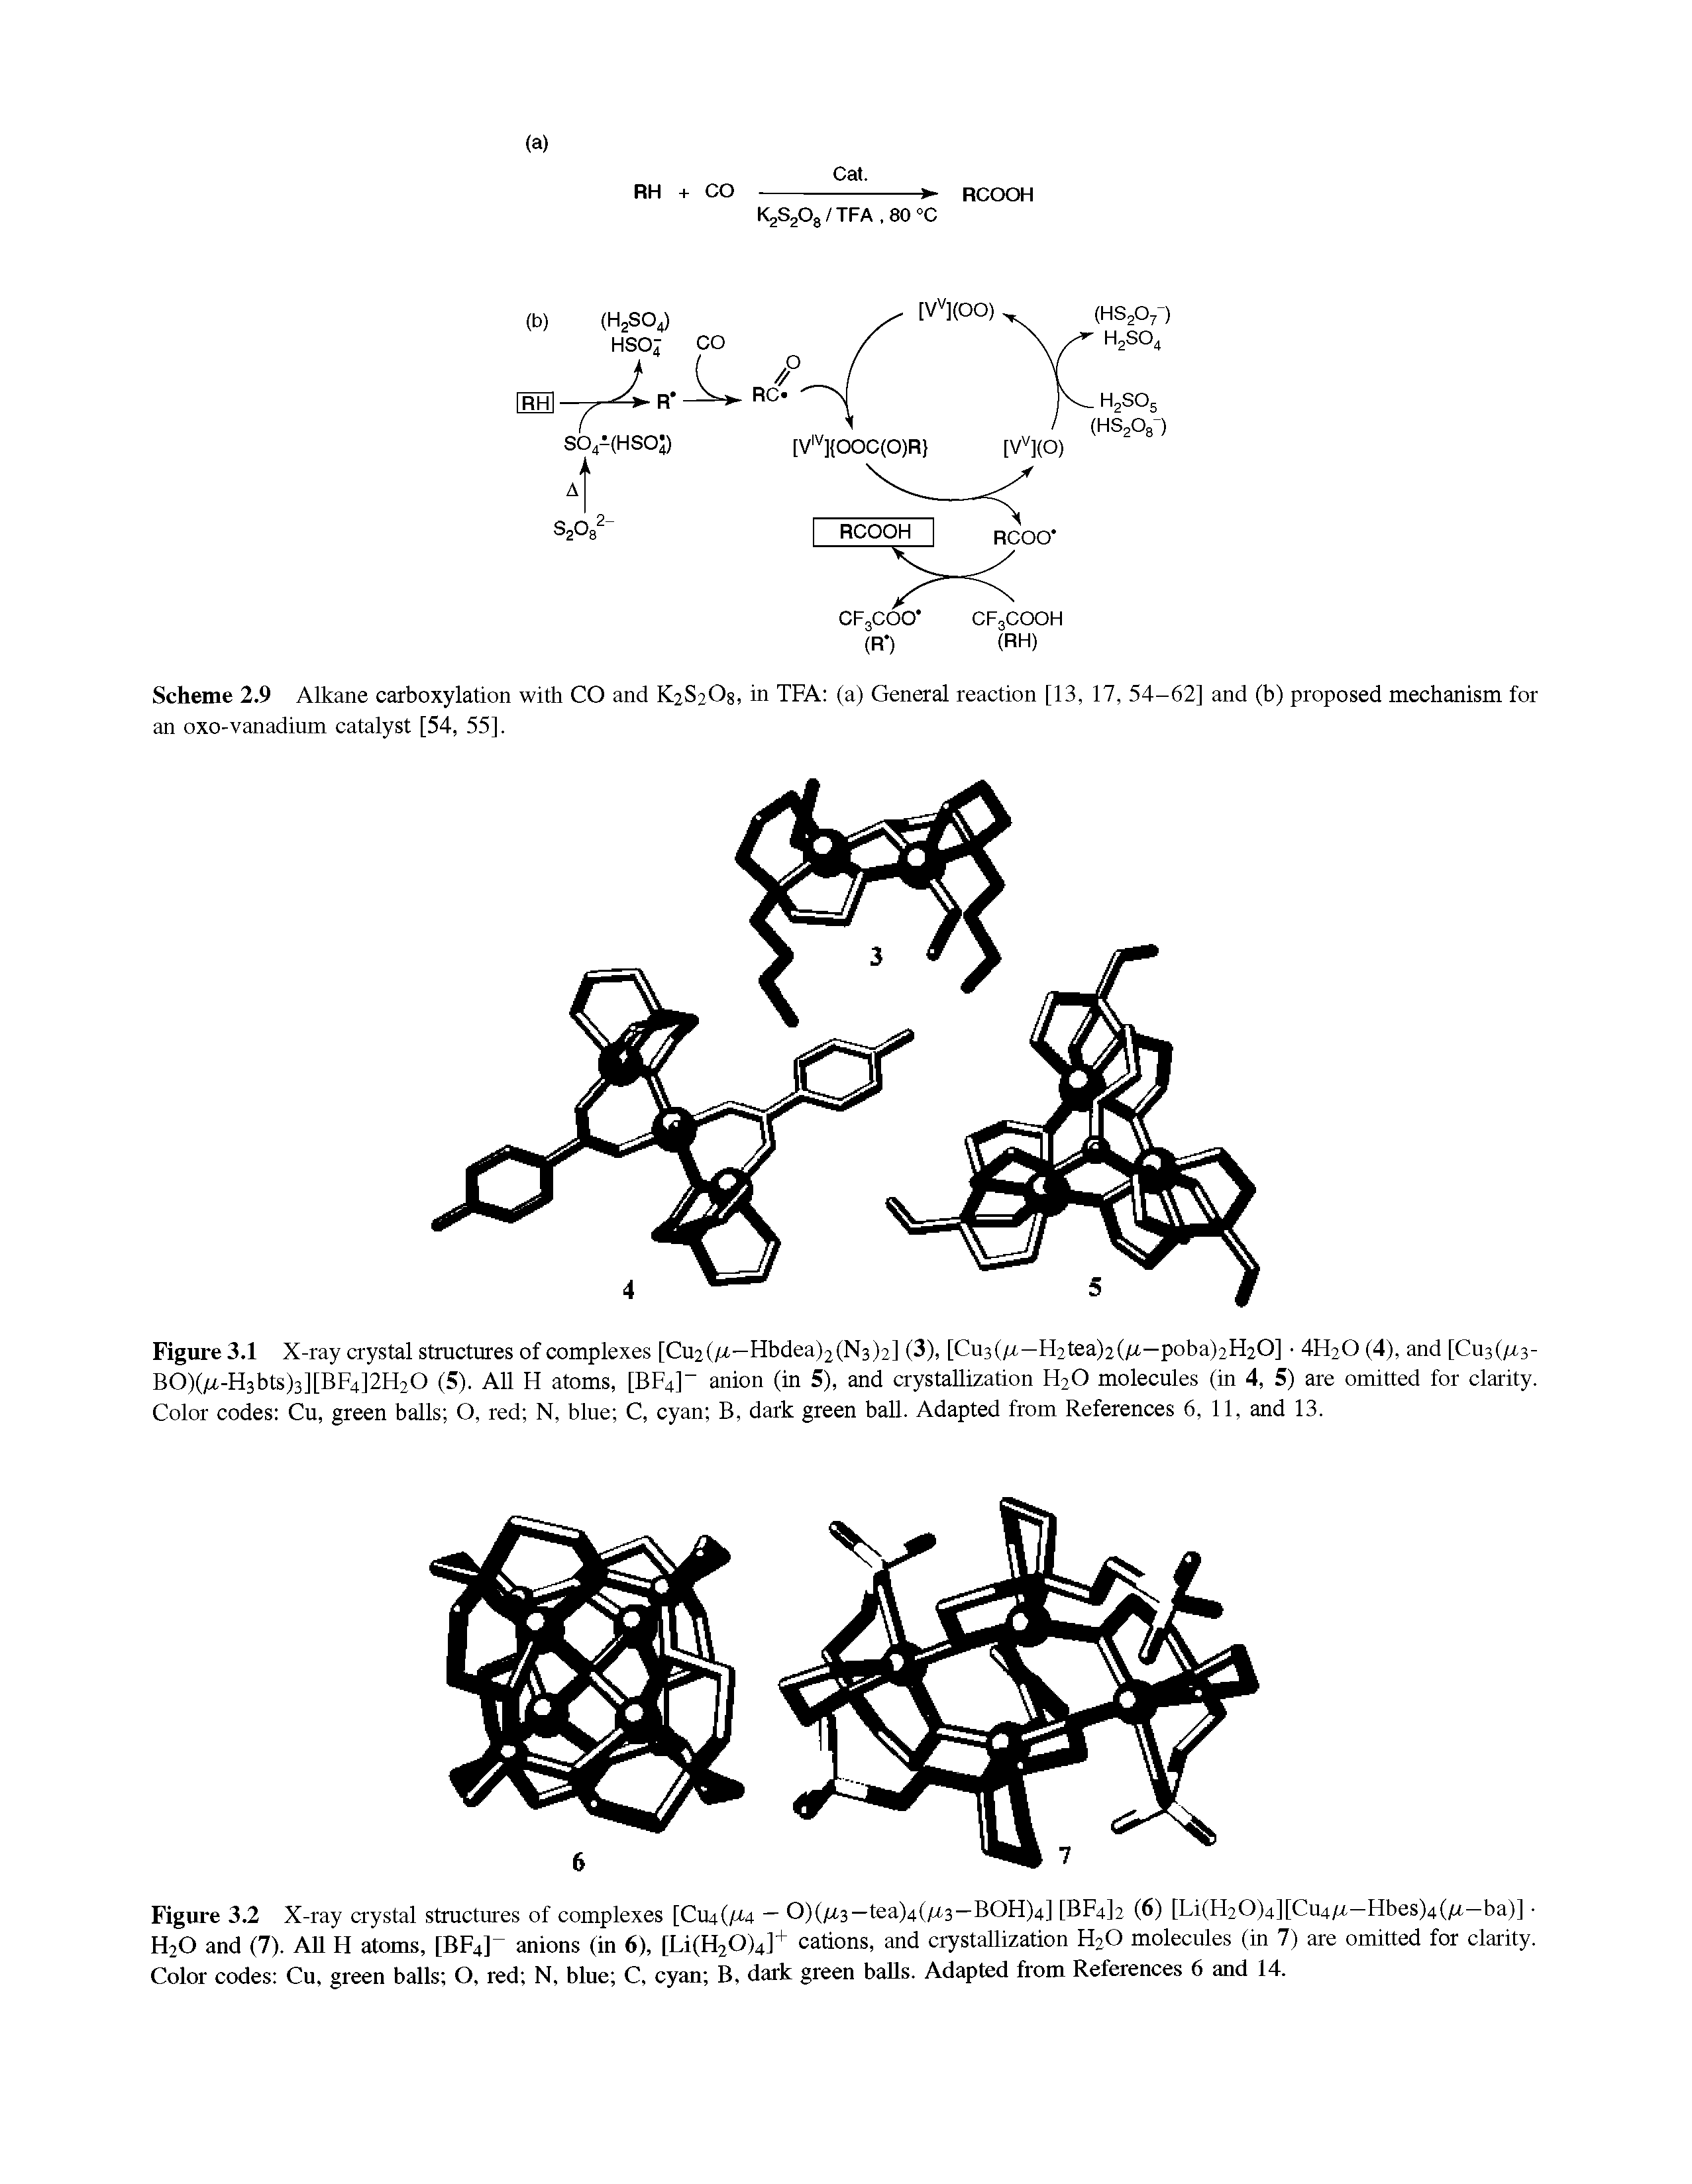 Scheme 2.9 Alkane carboxylation with CO and K2S2O8, in TFA (a) General reaction [13, 17, 54-62] and (b) proposed mechanism for an oxo-vanadium catalyst [54, 55],...